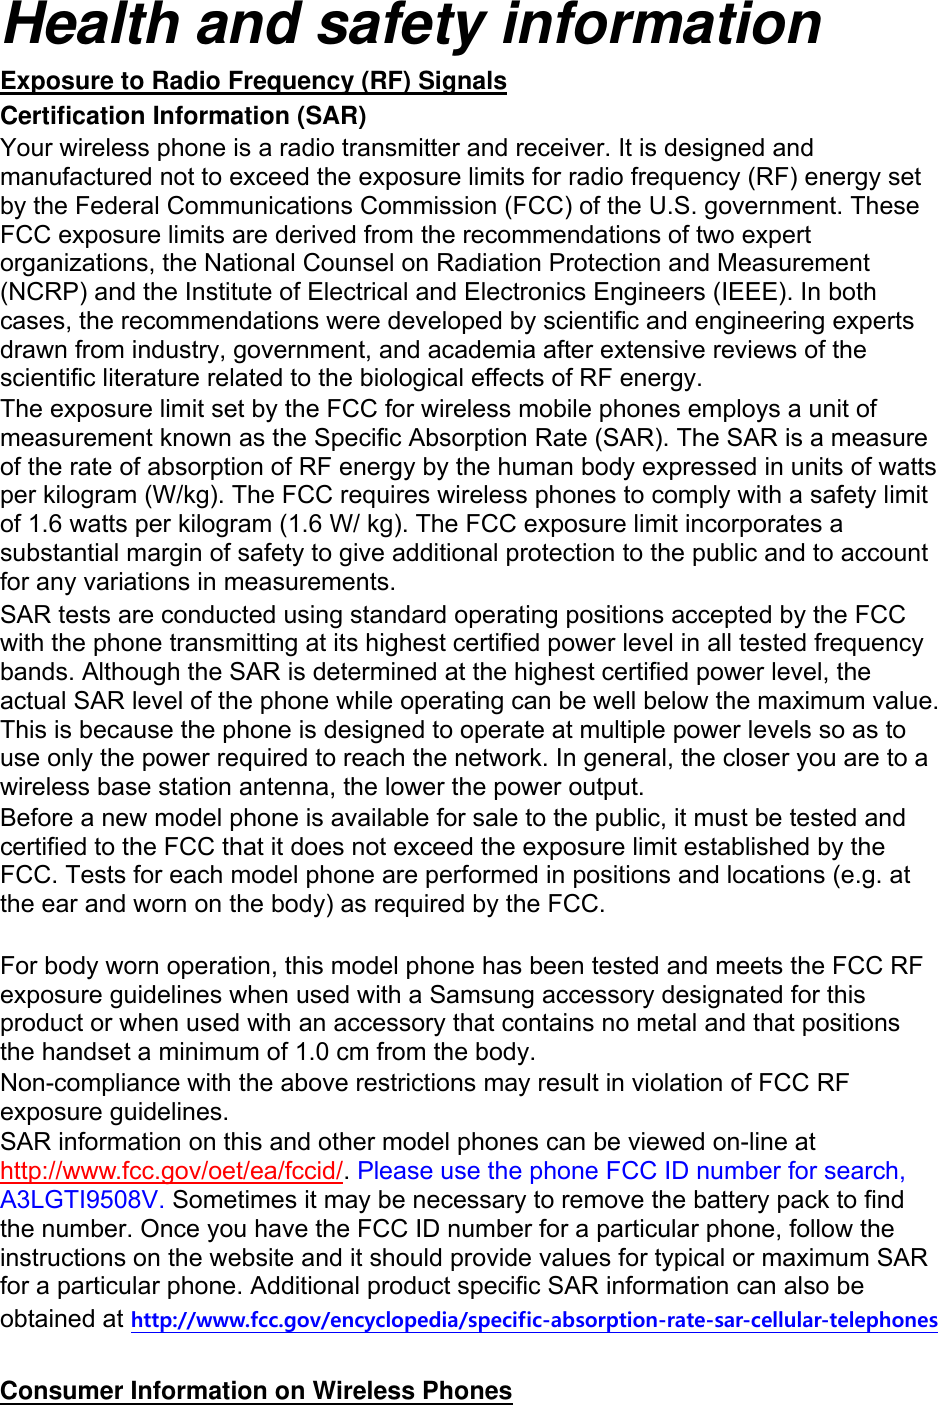 Health and safety information Exposure to Radio Frequency (RF) Signals Certification Information (SAR) Your wireless phone is a radio transmitter and receiver. It is designed and manufactured not to exceed the exposure limits for radio frequency (RF) energy set by the Federal Communications Commission (FCC) of the U.S. government. These FCC exposure limits are derived from the recommendations of two expert organizations, the National Counsel on Radiation Protection and Measurement (NCRP) and the Institute of Electrical and Electronics Engineers (IEEE). In both cases, the recommendations were developed by scientific and engineering experts drawn from industry, government, and academia after extensive reviews of the scientific literature related to the biological effects of RF energy. The exposure limit set by the FCC for wireless mobile phones employs a unit of measurement known as the Specific Absorption Rate (SAR). The SAR is a measure of the rate of absorption of RF energy by the human body expressed in units of watts per kilogram (W/kg). The FCC requires wireless phones to comply with a safety limit of 1.6 watts per kilogram (1.6 W/ kg). The FCC exposure limit incorporates a substantial margin of safety to give additional protection to the public and to account for any variations in measurements. SAR tests are conducted using standard operating positions accepted by the FCC with the phone transmitting at its highest certified power level in all tested frequency bands. Although the SAR is determined at the highest certified power level, the actual SAR level of the phone while operating can be well below the maximum value. This is because the phone is designed to operate at multiple power levels so as to use only the power required to reach the network. In general, the closer you are to a wireless base station antenna, the lower the power output. Before a new model phone is available for sale to the public, it must be tested and certified to the FCC that it does not exceed the exposure limit established by the FCC. Tests for each model phone are performed in positions and locations (e.g. at the ear and worn on the body) as required by the FCC.      For body worn operation, this model phone has been tested and meets the FCC RF exposure guidelines when used with a Samsung accessory designated for this product or when used with an accessory that contains no metal and that positions the handset a minimum of 1.0 cm from the body.   Non-compliance with the above restrictions may result in violation of FCC RF exposure guidelines. SAR information on this and other model phones can be viewed on-line at http://www.fcc.gov/oet/ea/fccid/. Please use the phone FCC ID number for search, A3LGTI9508V. Sometimes it may be necessary to remove the battery pack to find the number. Once you have the FCC ID number for a particular phone, follow the instructions on the website and it should provide values for typical or maximum SAR for a particular phone. Additional product specific SAR information can also be obtained at http://www.fcc.gov/encyclopedia/specific-absorption-rate-sar-cellular-telephones  Consumer Information on Wireless Phones 